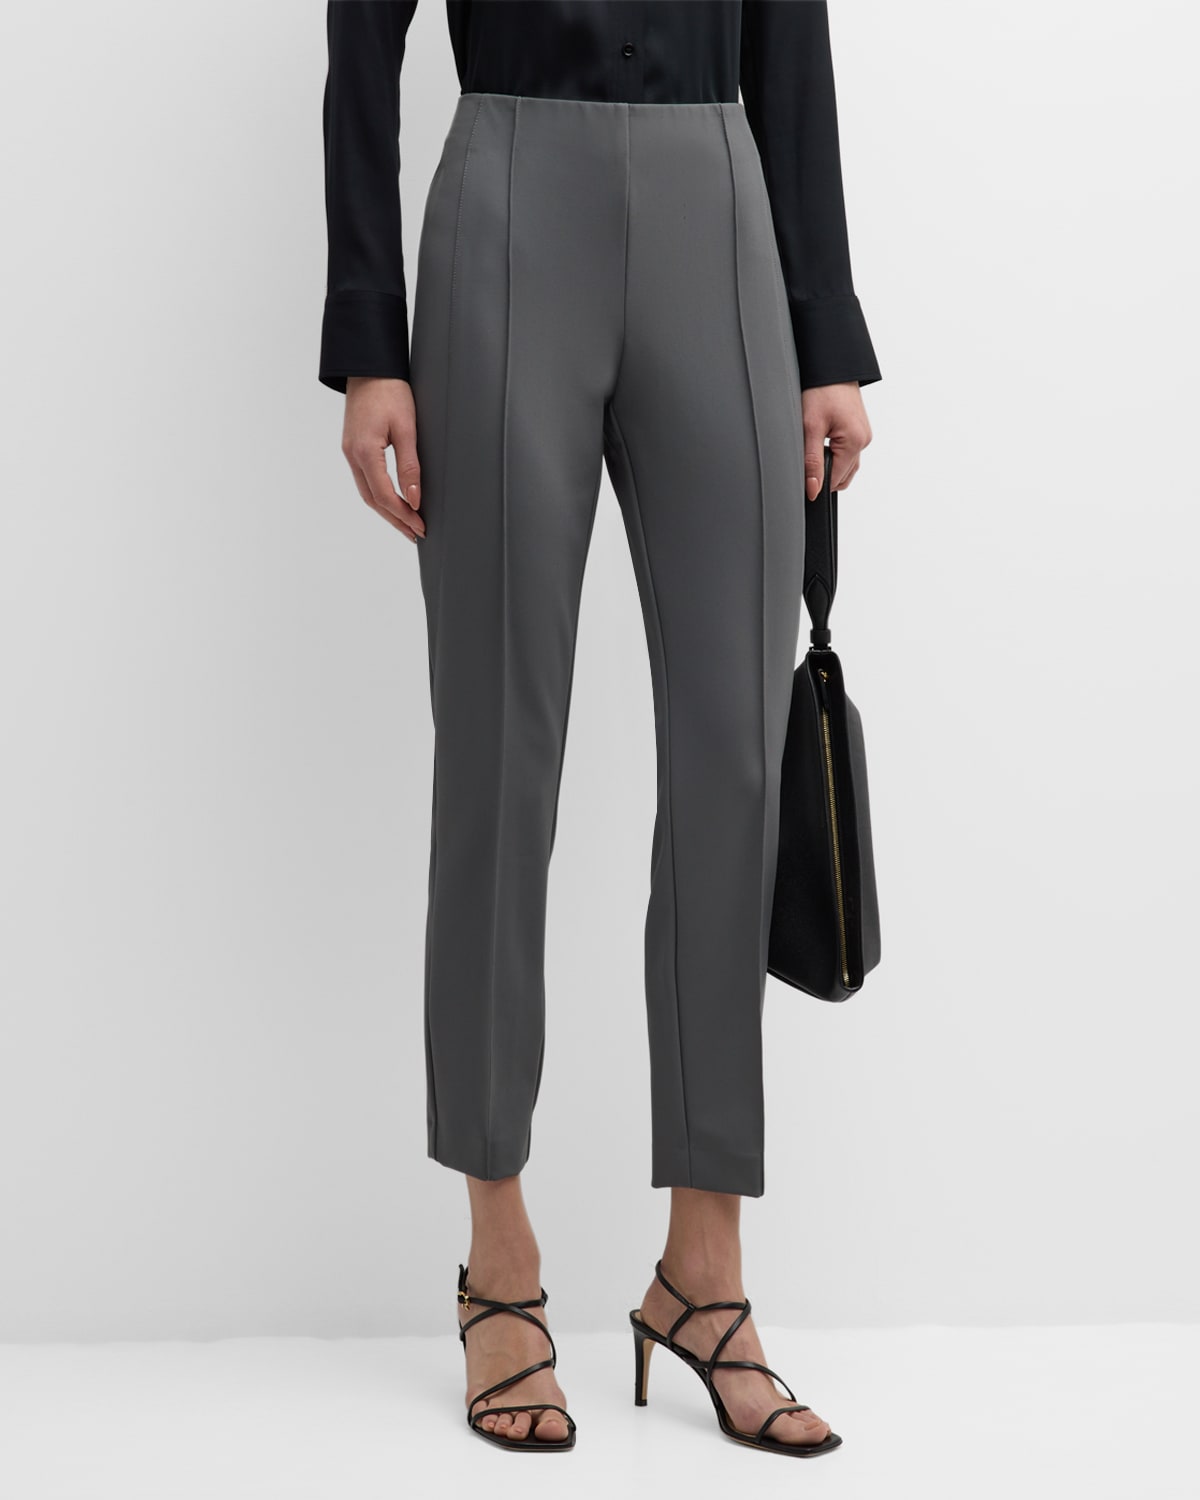 Lafayette 148 Petite Acclaimed Stretch Gramercy Trouser In Shale